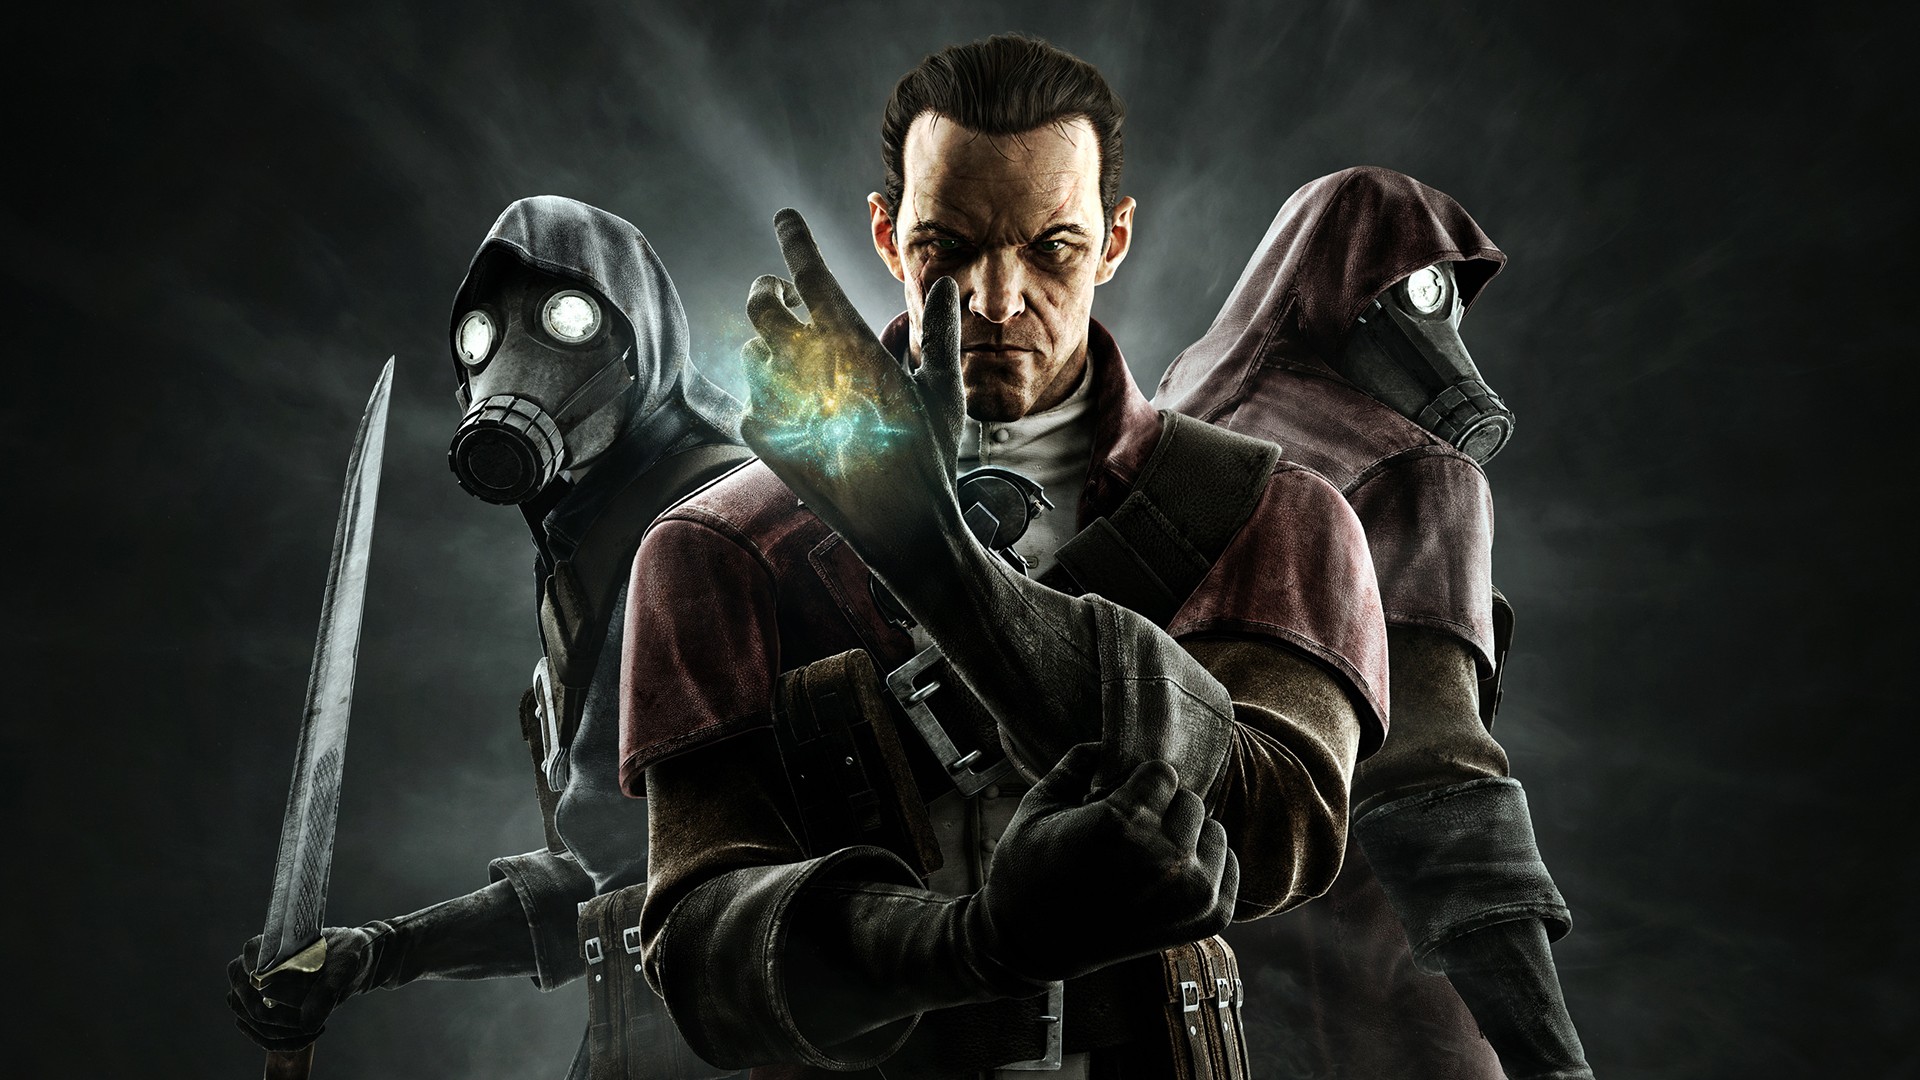 Looking for some sweet Daud art/ wallpaper.: dishonored